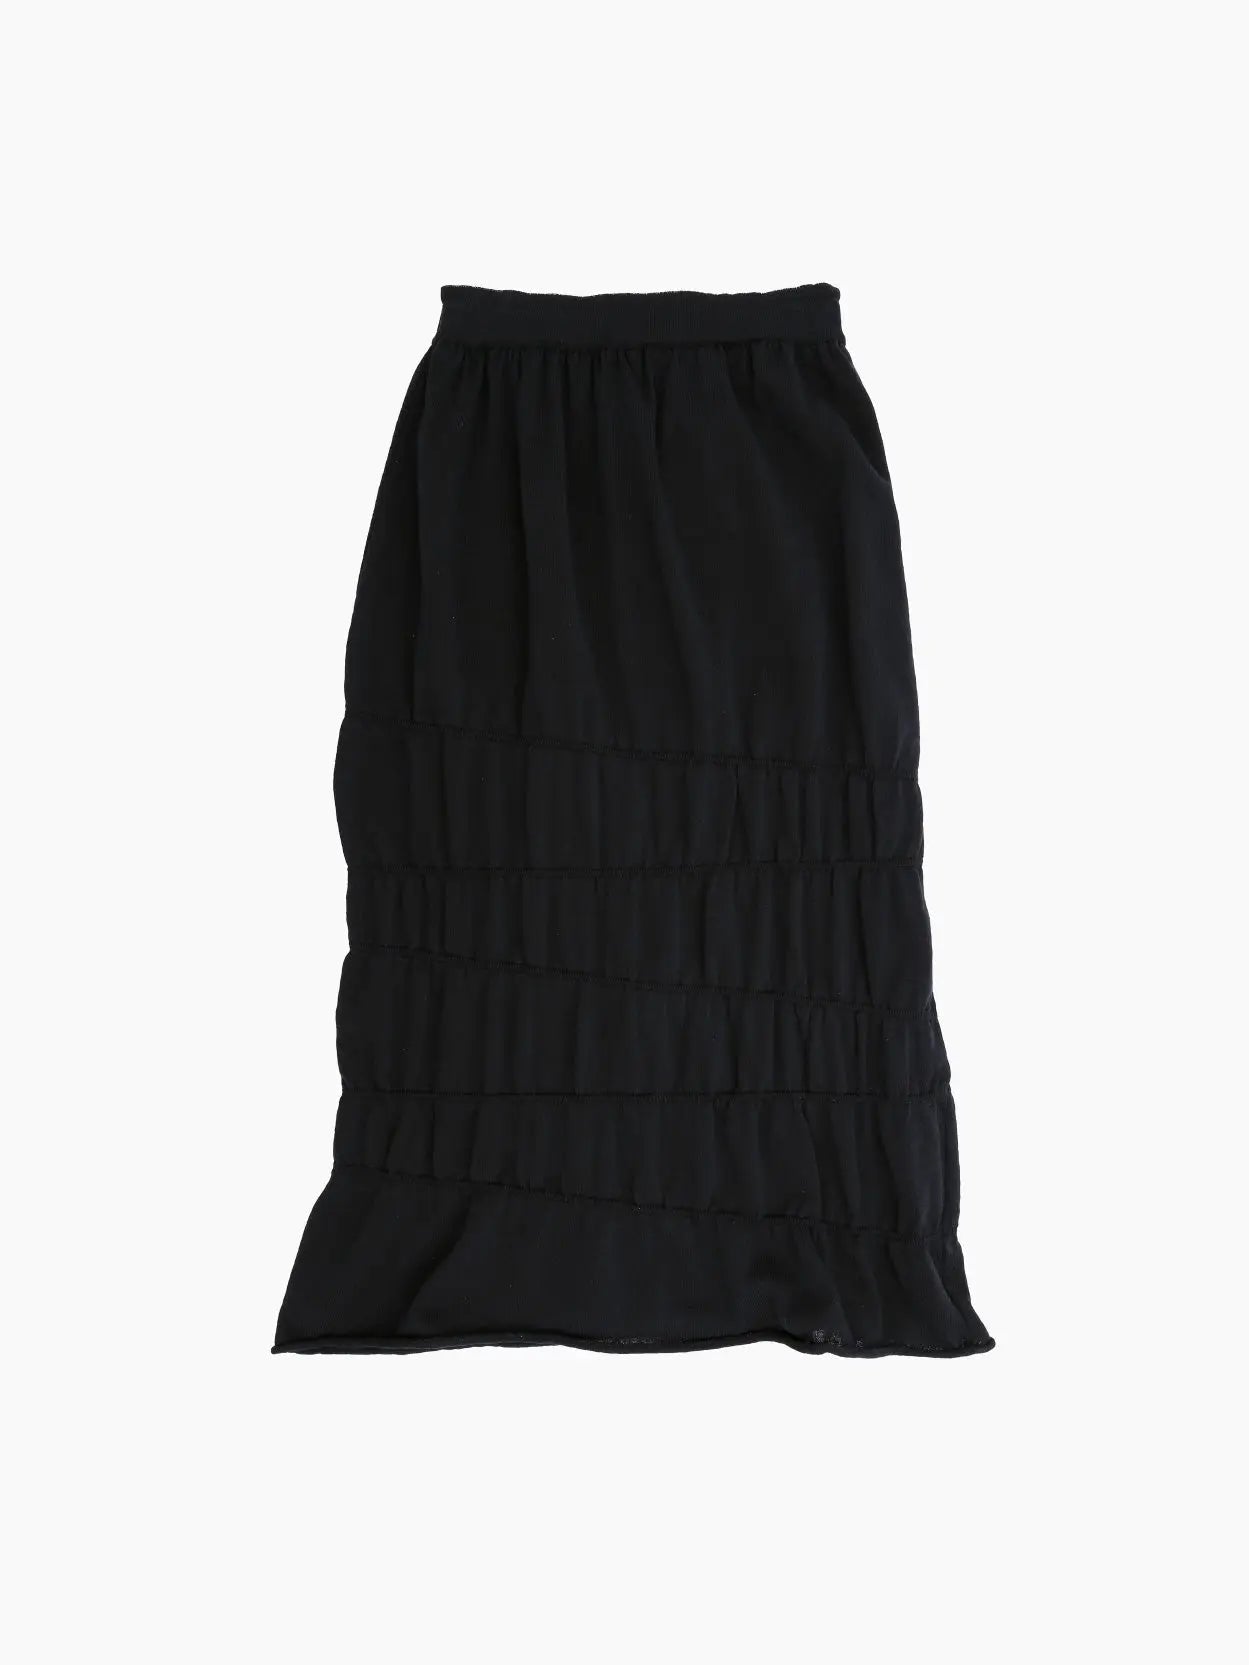 The Asa Skirt Black by Rus is a black, knee-length skirt with an elastic waistband and multiple horizontal ruffles throughout its length. The lightweight, flowy fabric makes it perfect for casual or semi-formal occasions. Available at BassalStore in Barcelona.